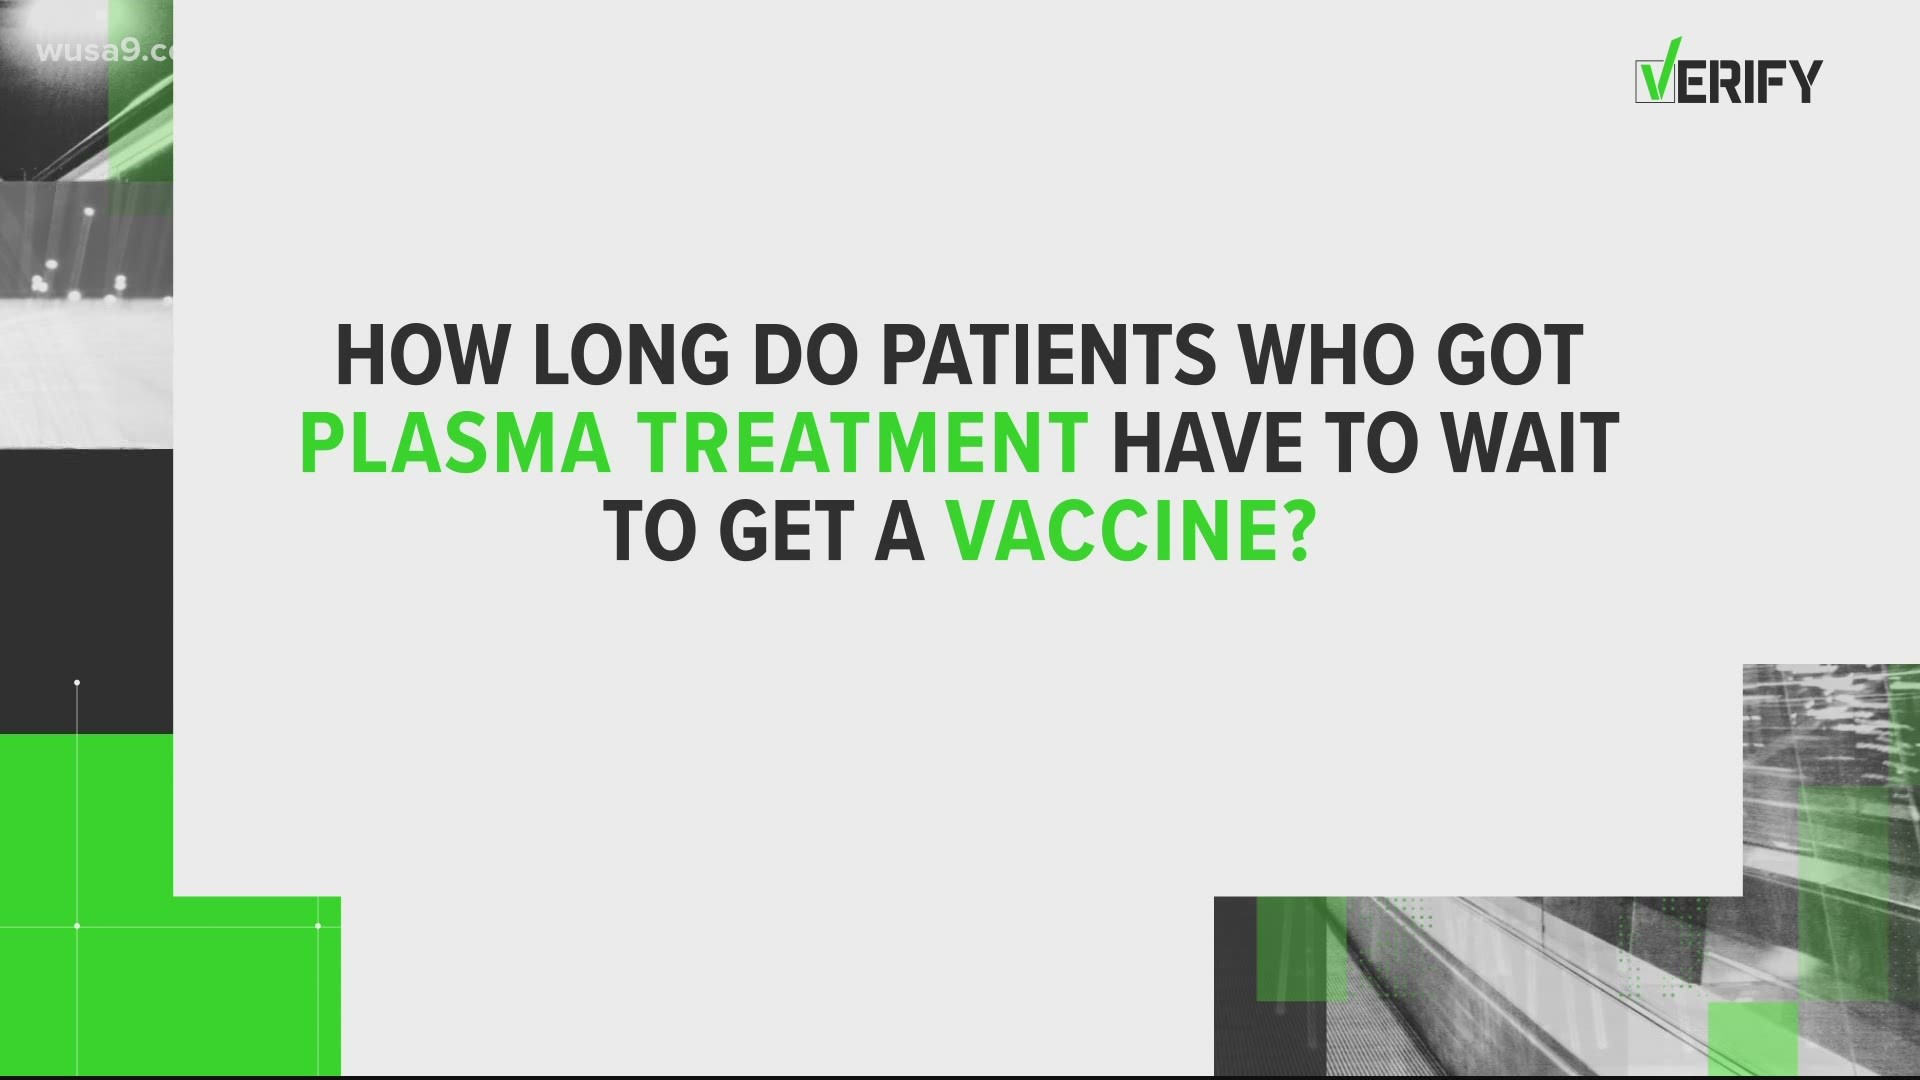 The CDC is recommending that patients who received an antibody treatment wait 90 days to get the vaccine.